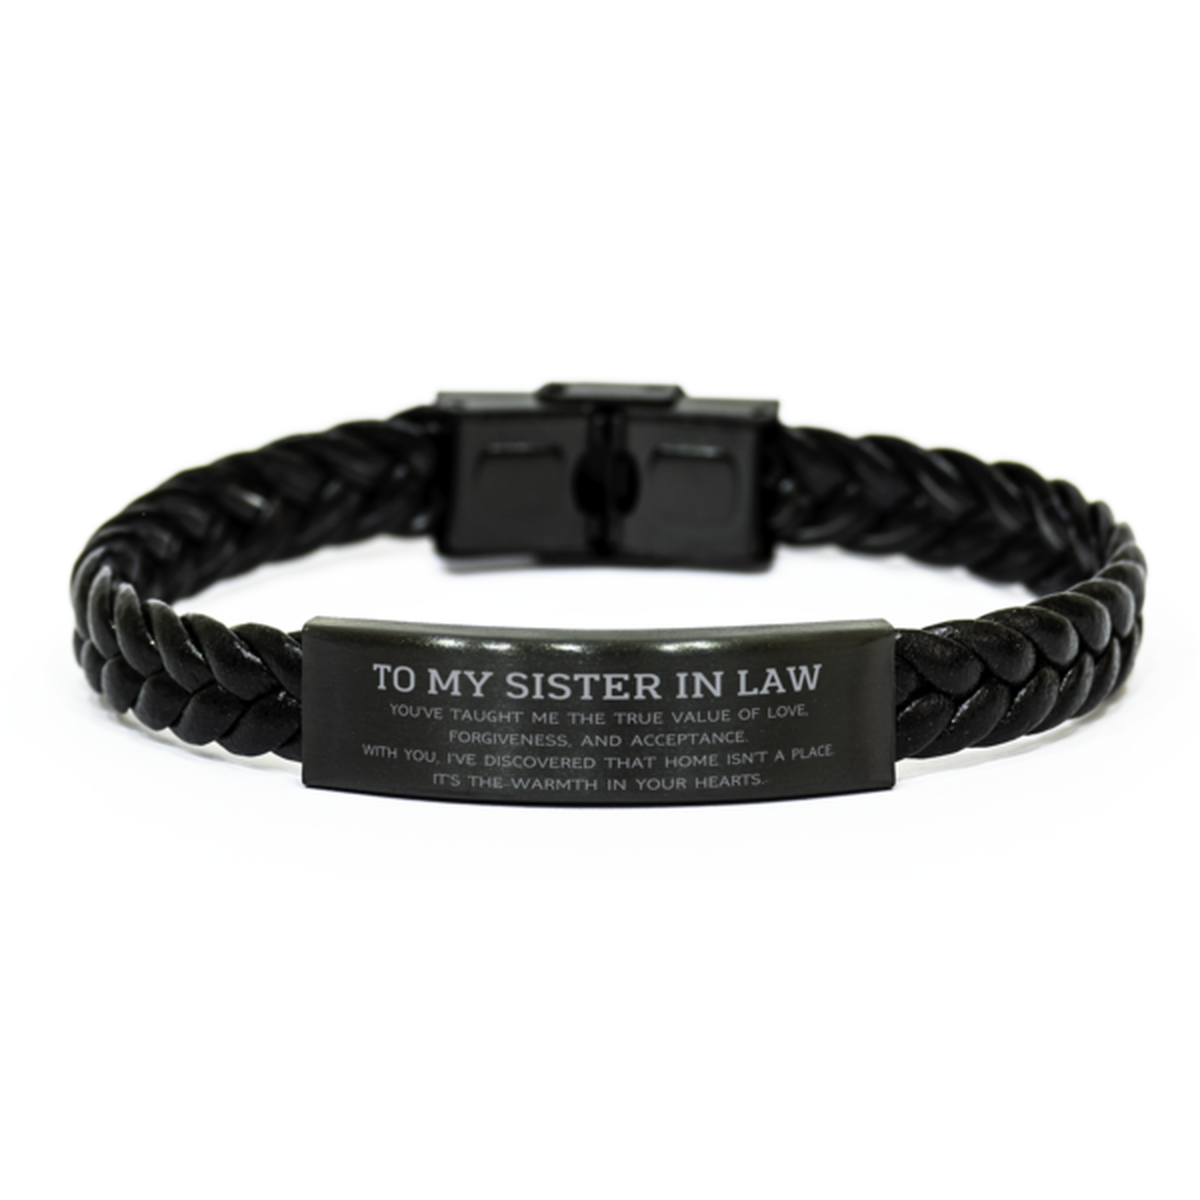 To My Sister In Law Gifts, You've taught me the true value of love, Thank You Gifts For Sister In Law, Birthday Braided Leather Bracelet For Sister In Law